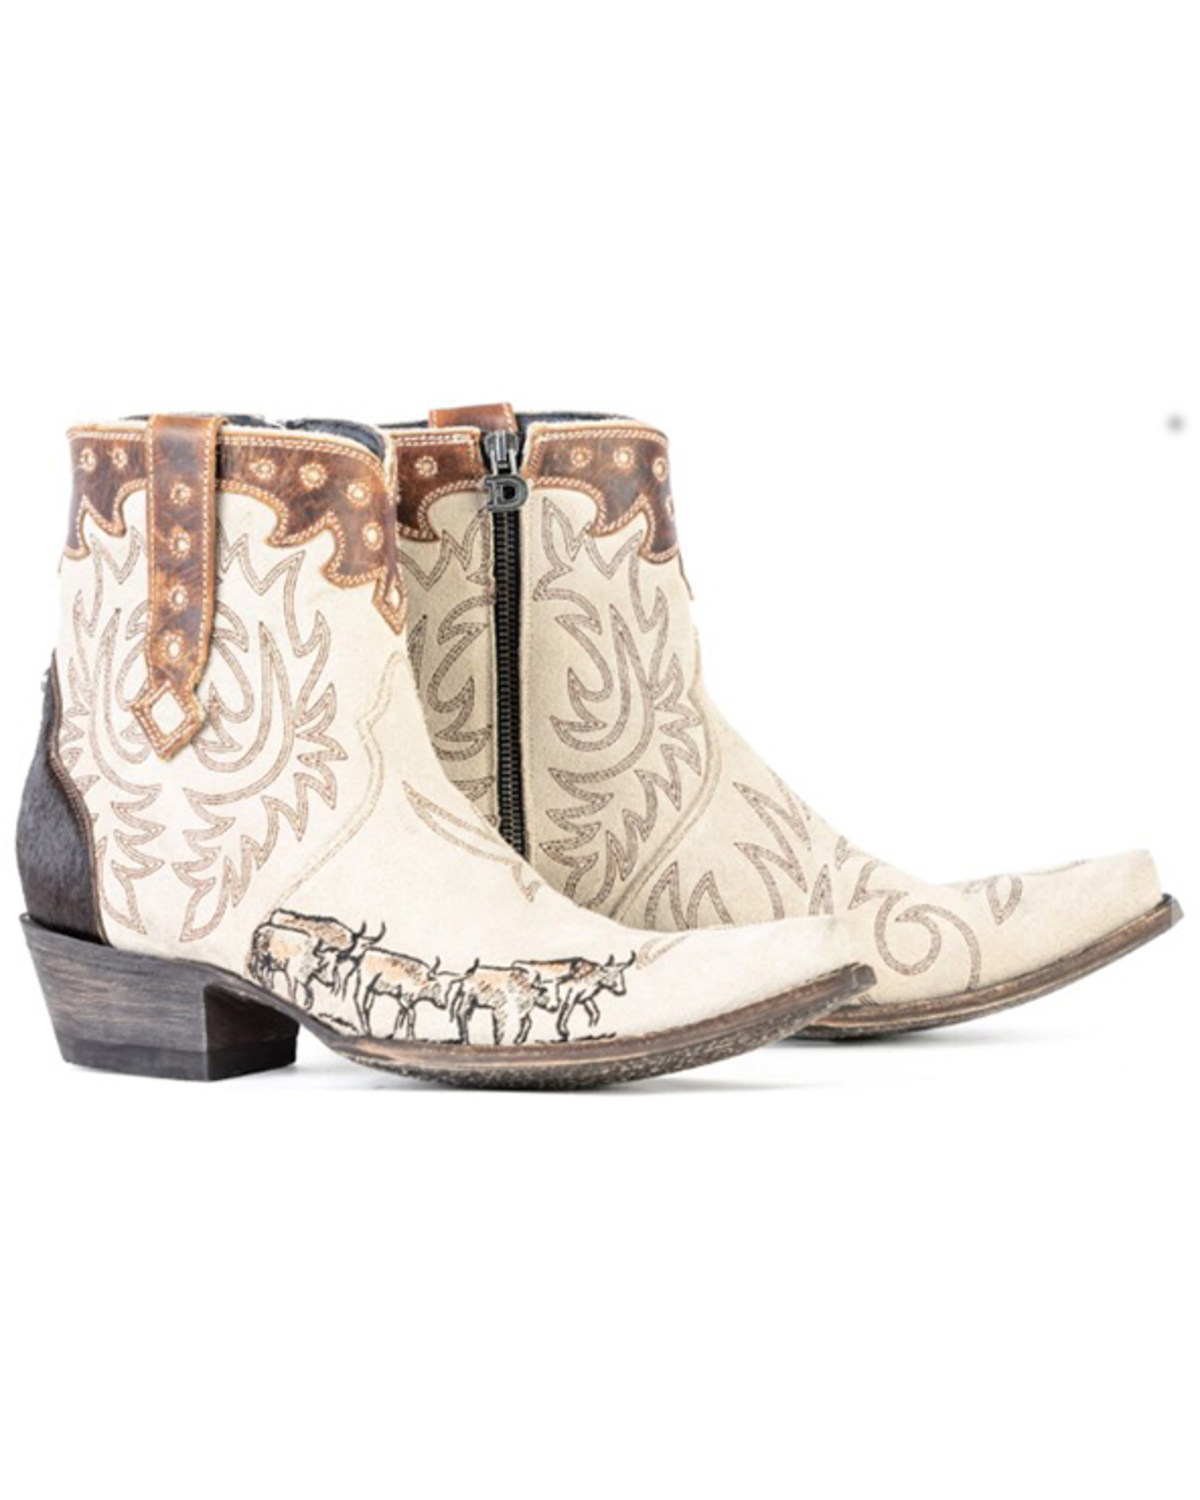 Double D Ranch Women's Red River Crossing Boots - Snip Toe